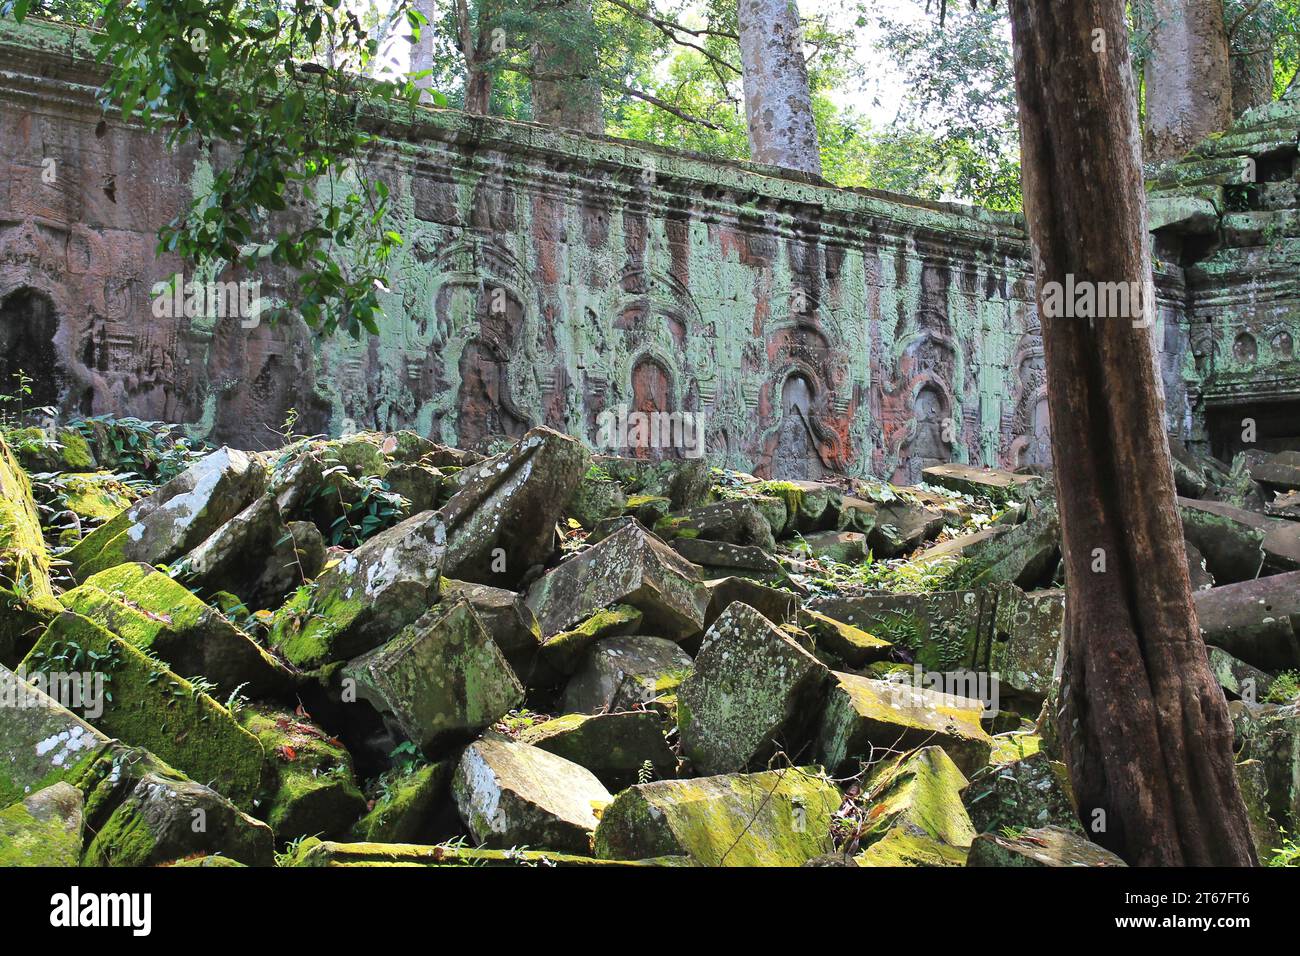 Mossy carved stone blocks in foreground with still standing ancient temple wall behind at the Angkor Archaeological Park near Siem Reap, Cambodia Stock Photo